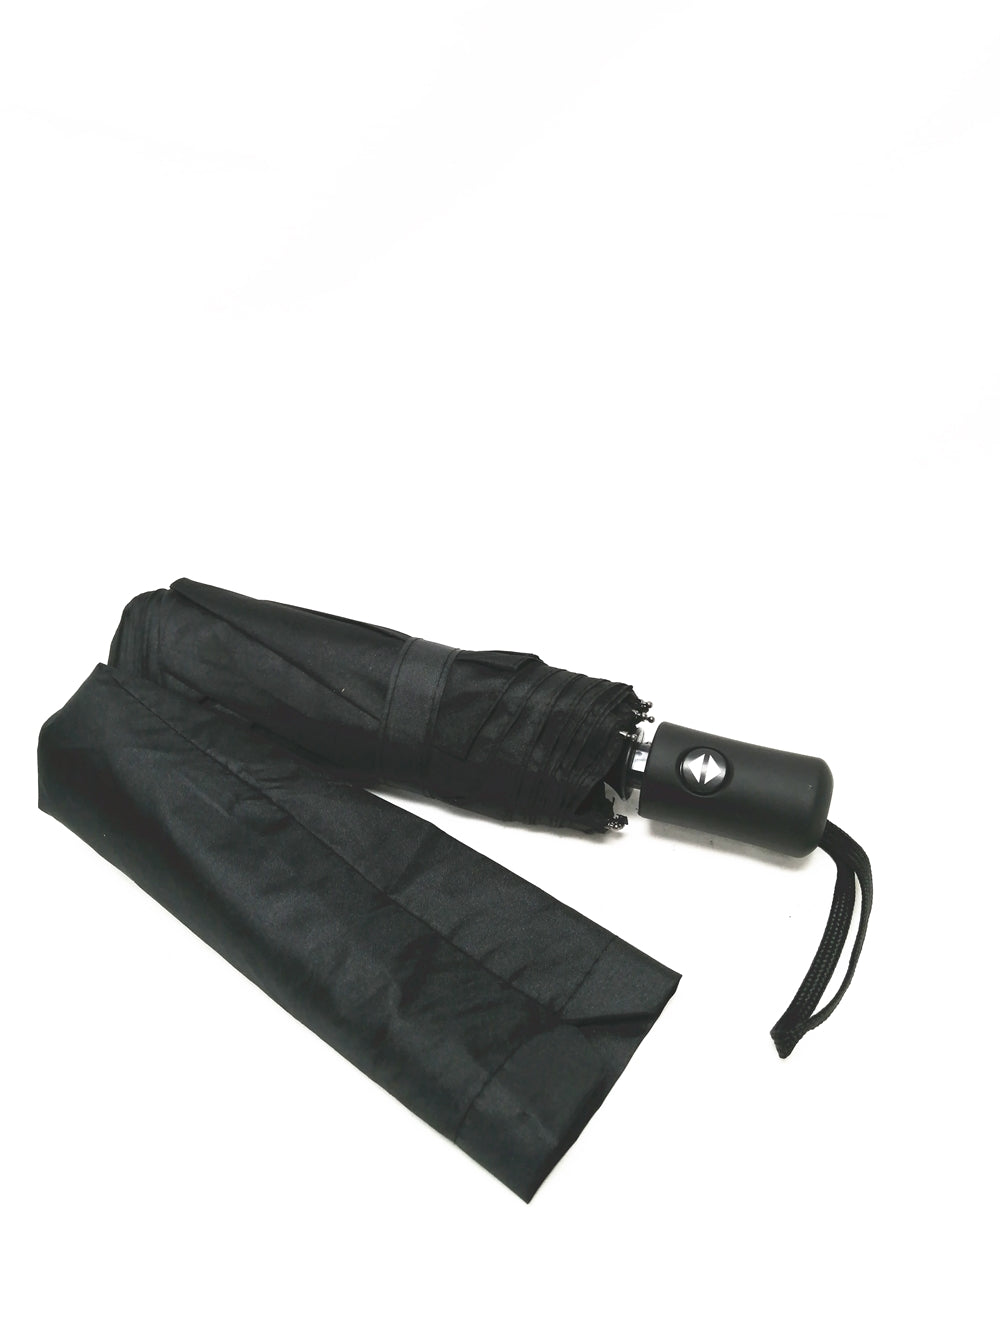 automatically opening and closing foldable umbrella black